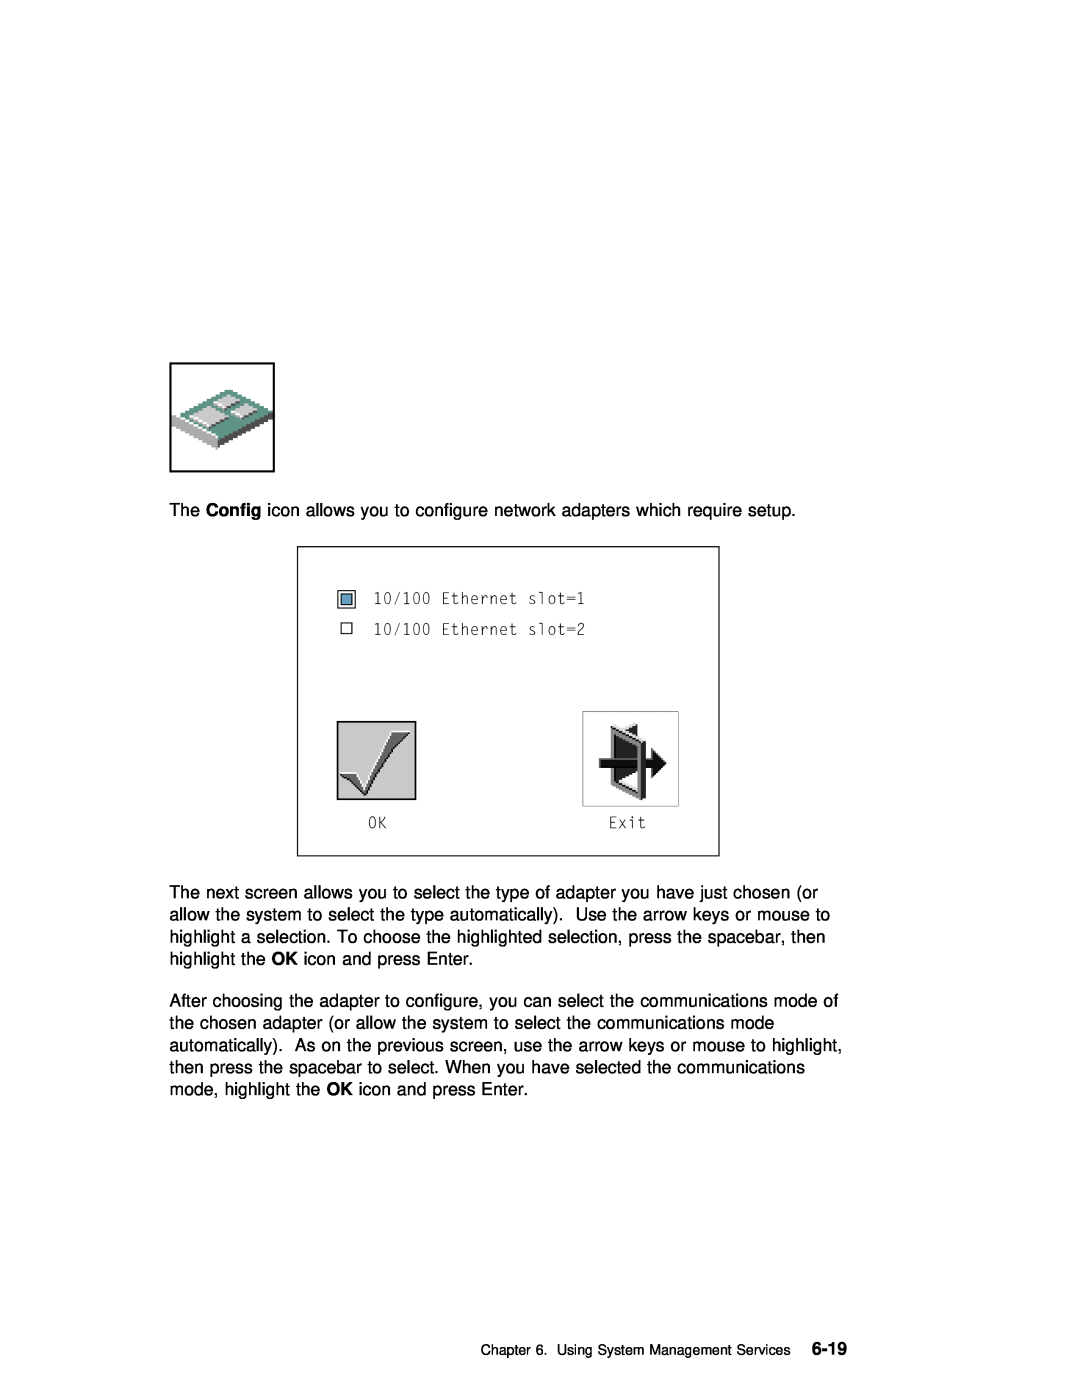 IBM B50 manual 6-19, The Config icon allows you to configure network adapters which require setup 